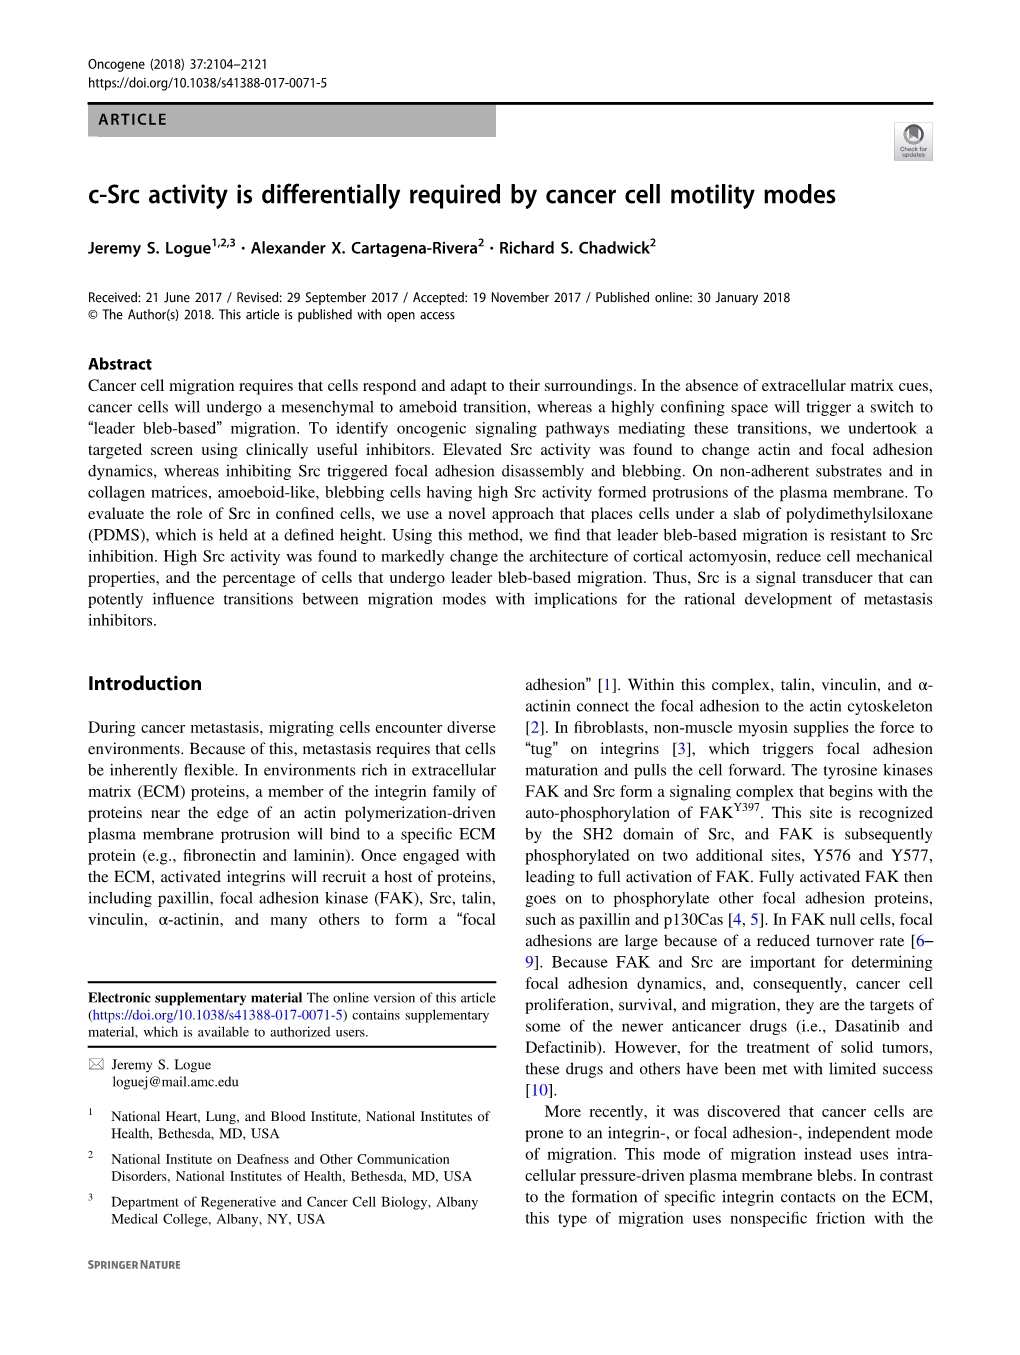 C-Src Activity Is Differentially Required by Cancer Cell Motility Modes